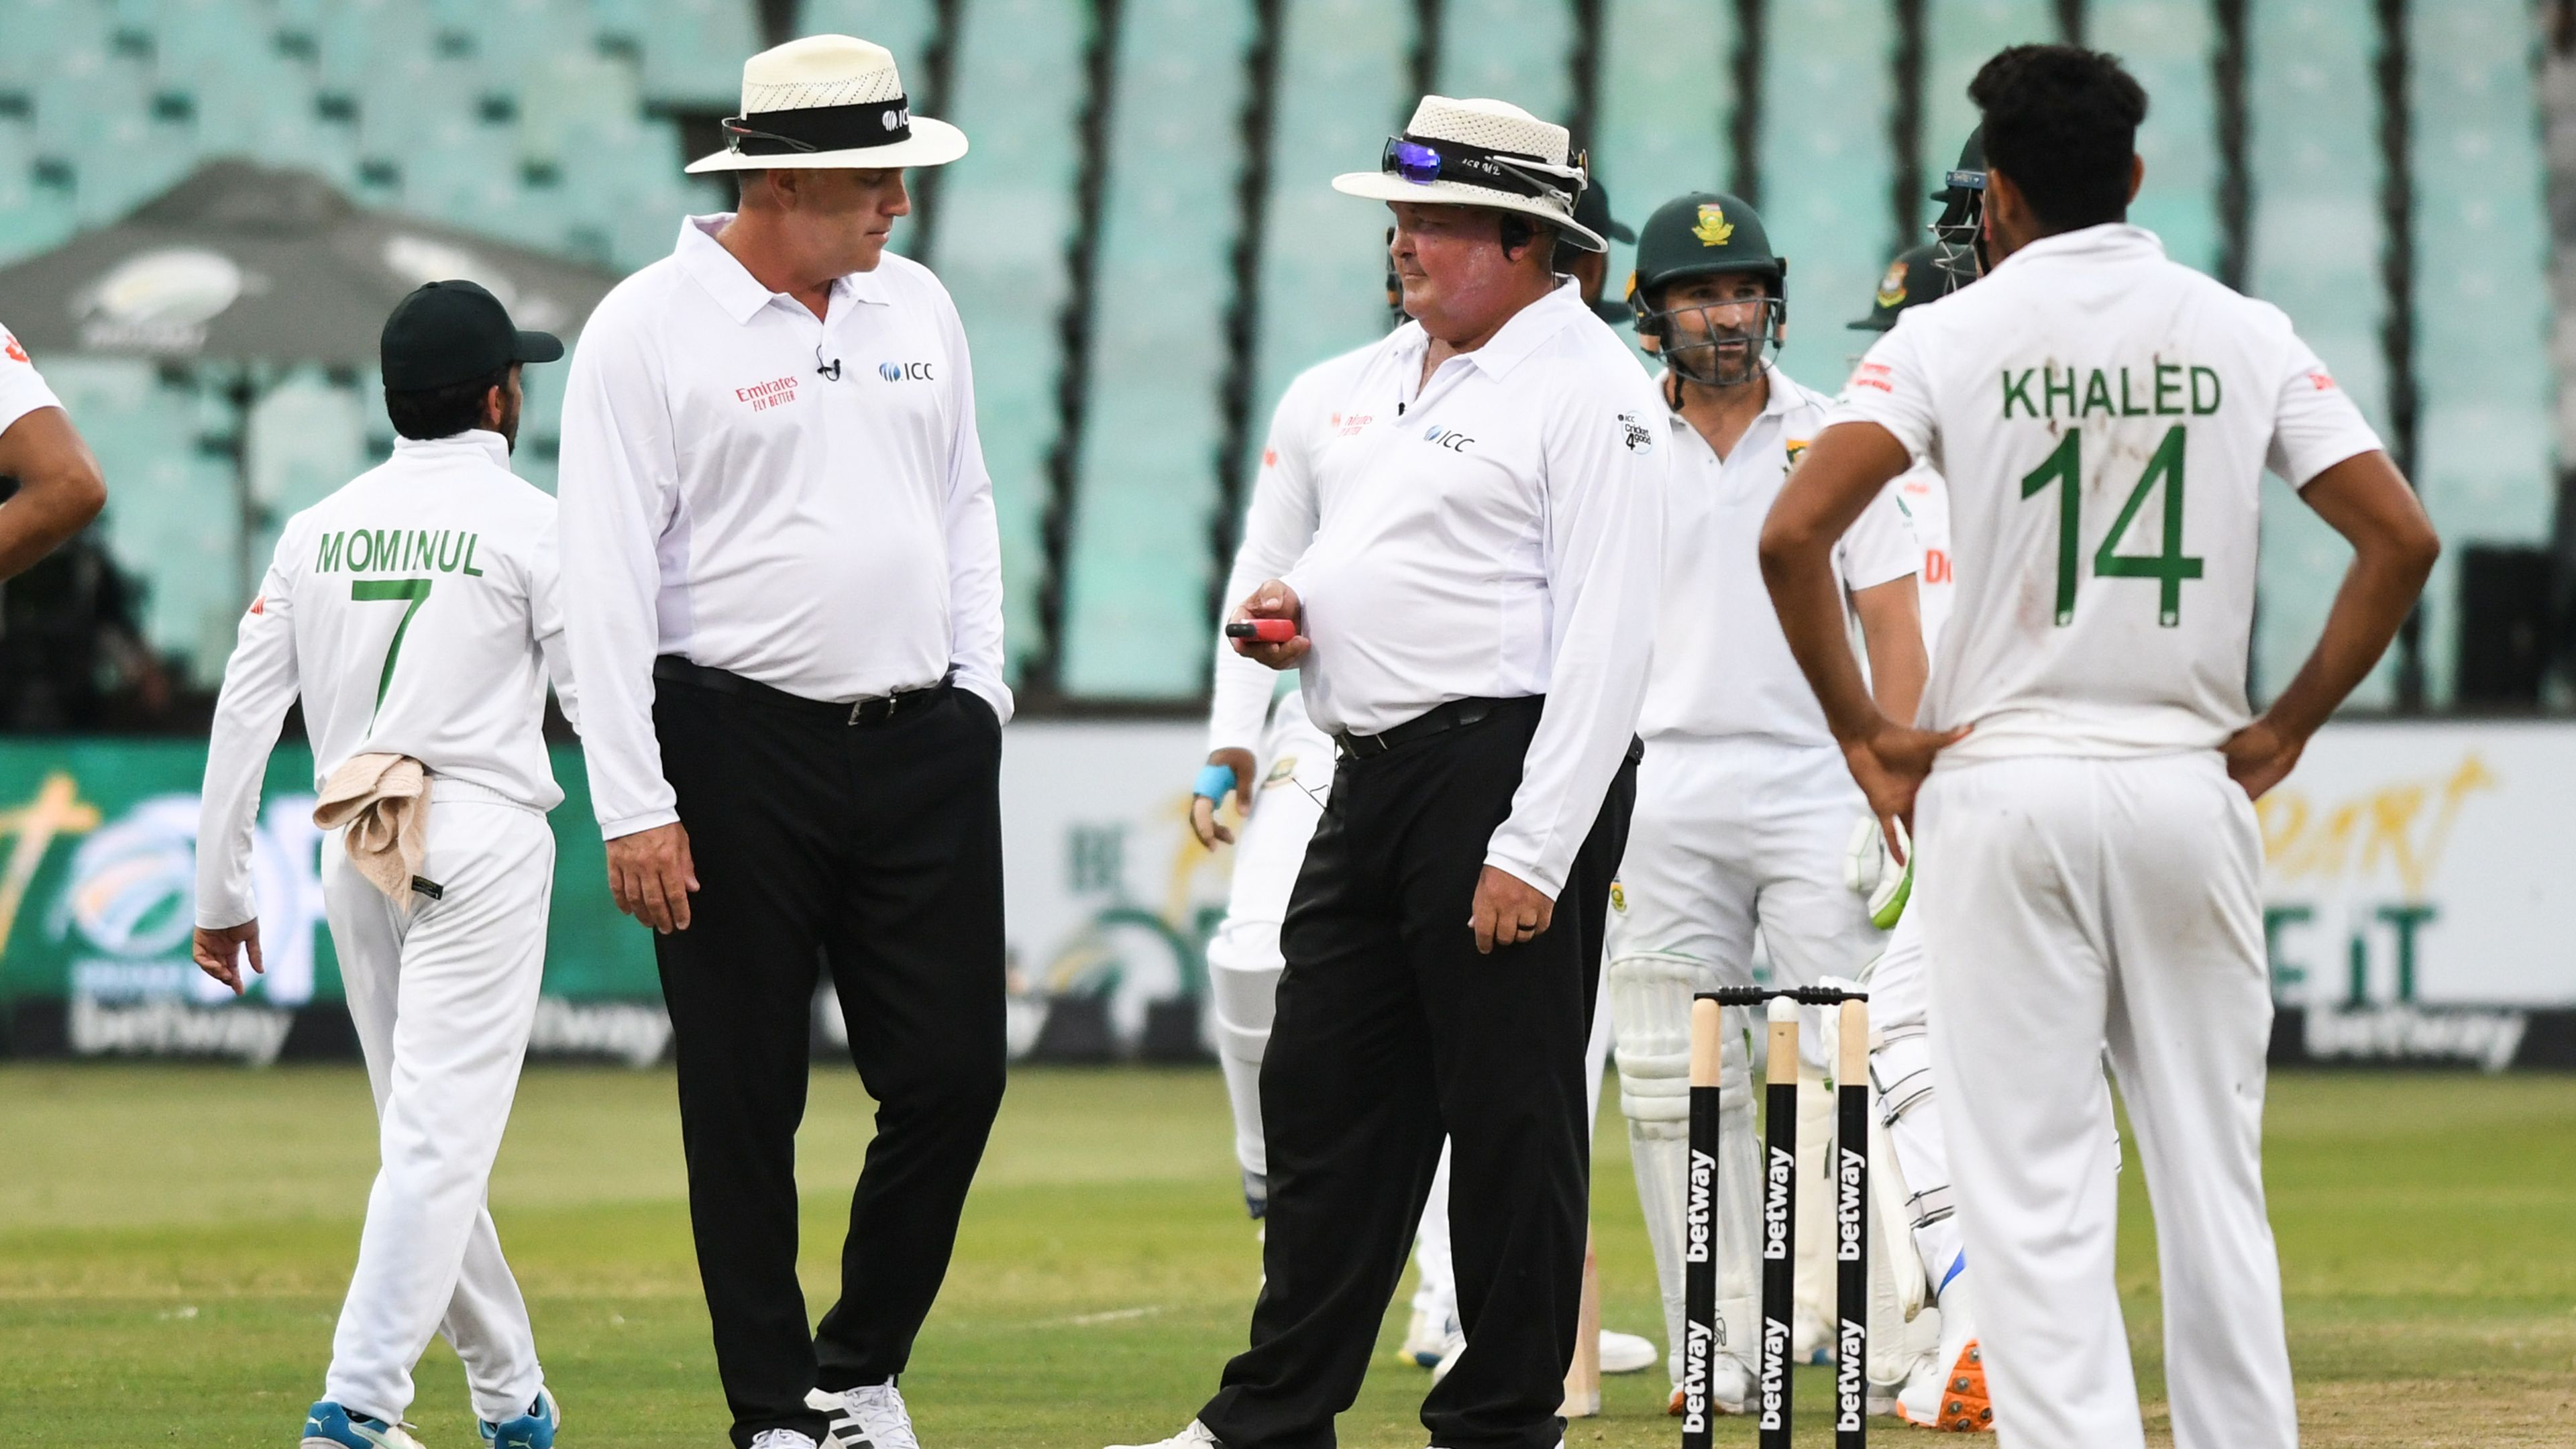 Bangladesh to lodge formal ICC complaint into Durban Test officials, calls for reinstating of neutral umpires